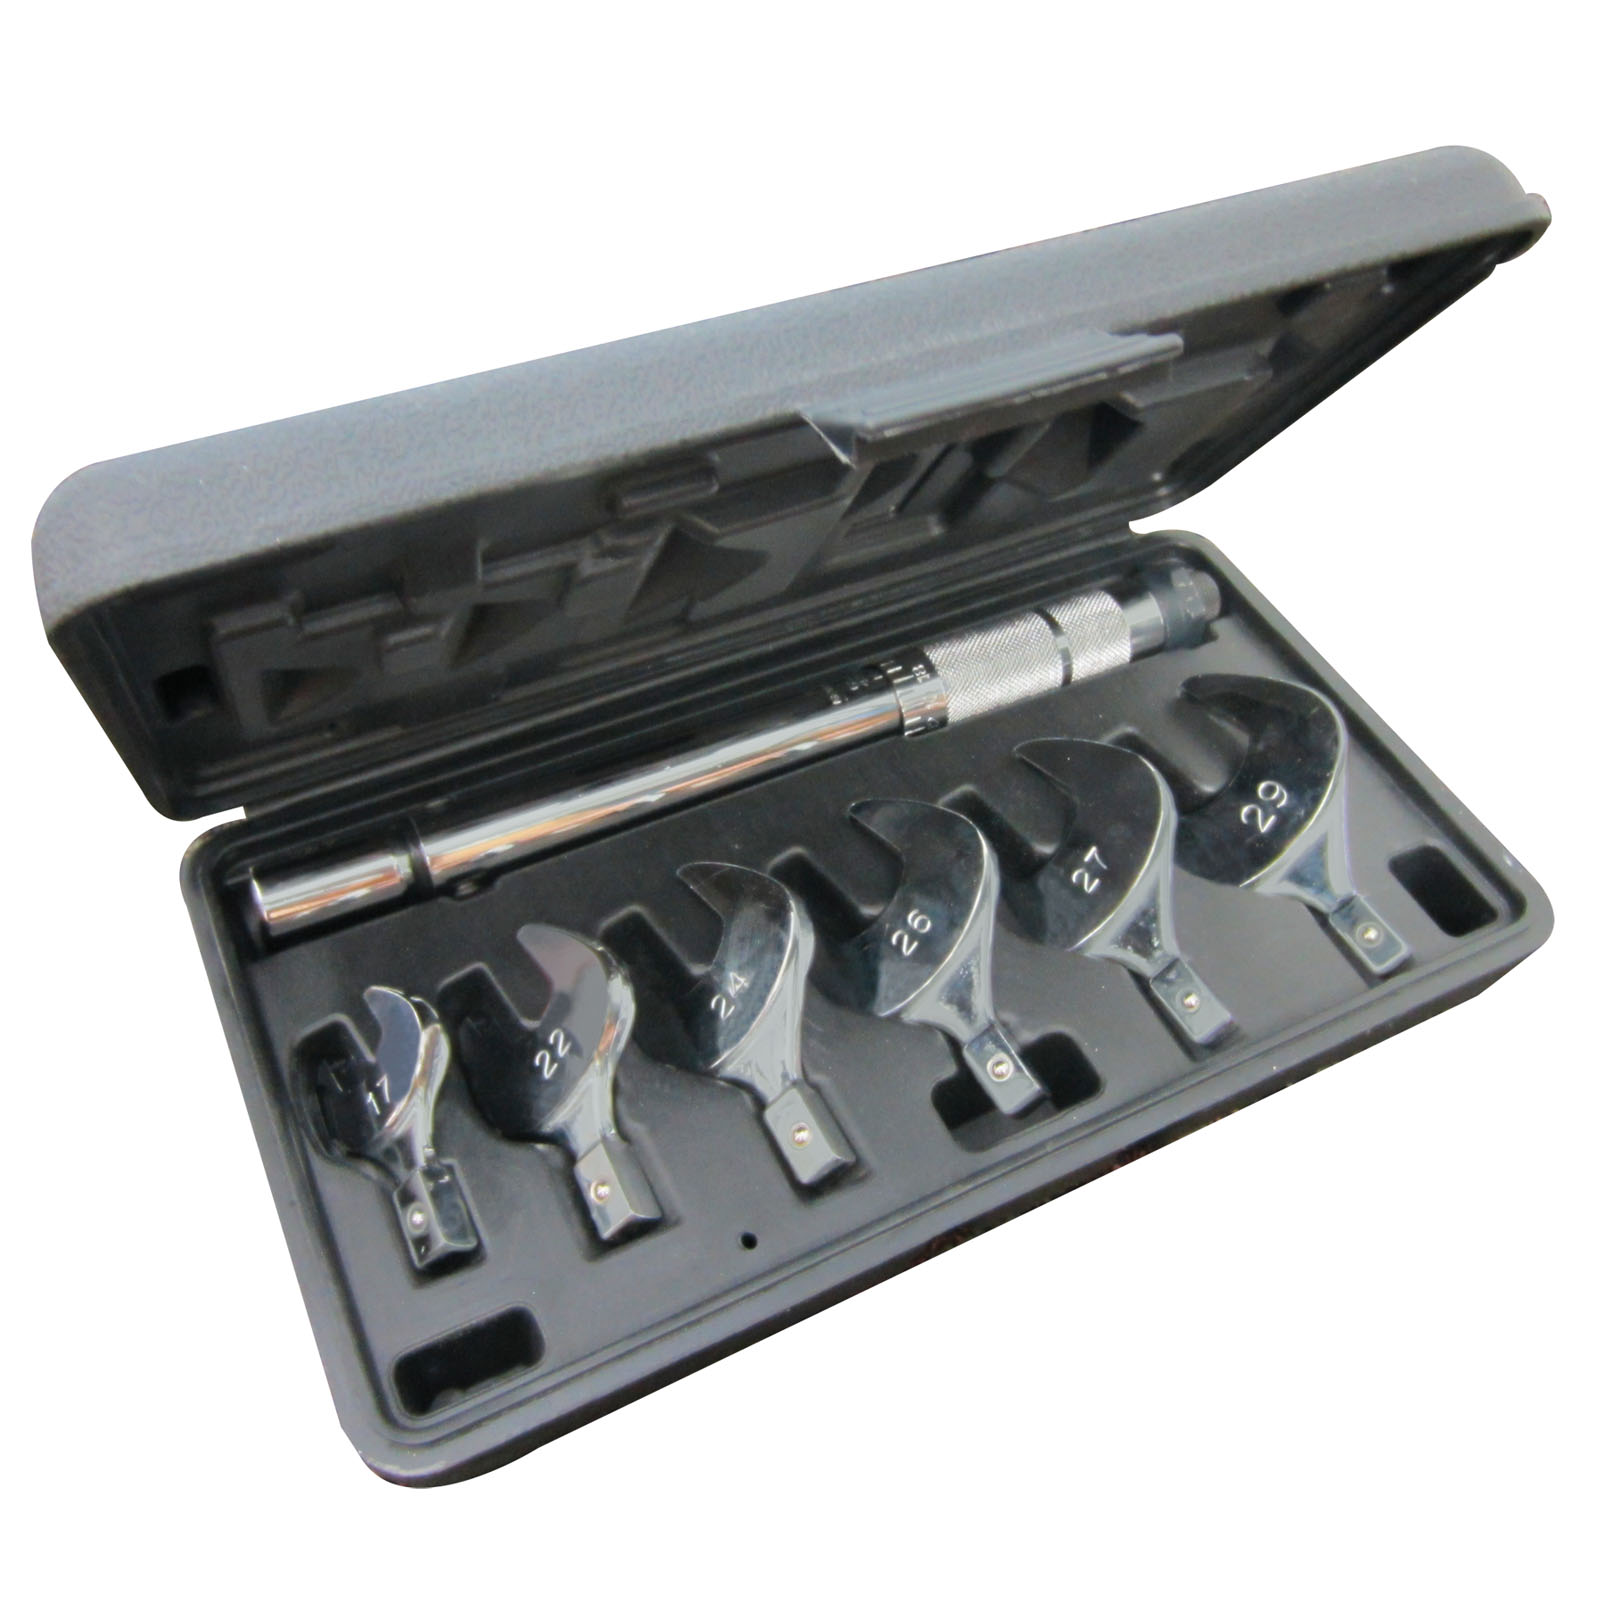 Torque Wrench Kit - 1/4", 3/8", 1/2", 5/8", 3/4" & 7/8"